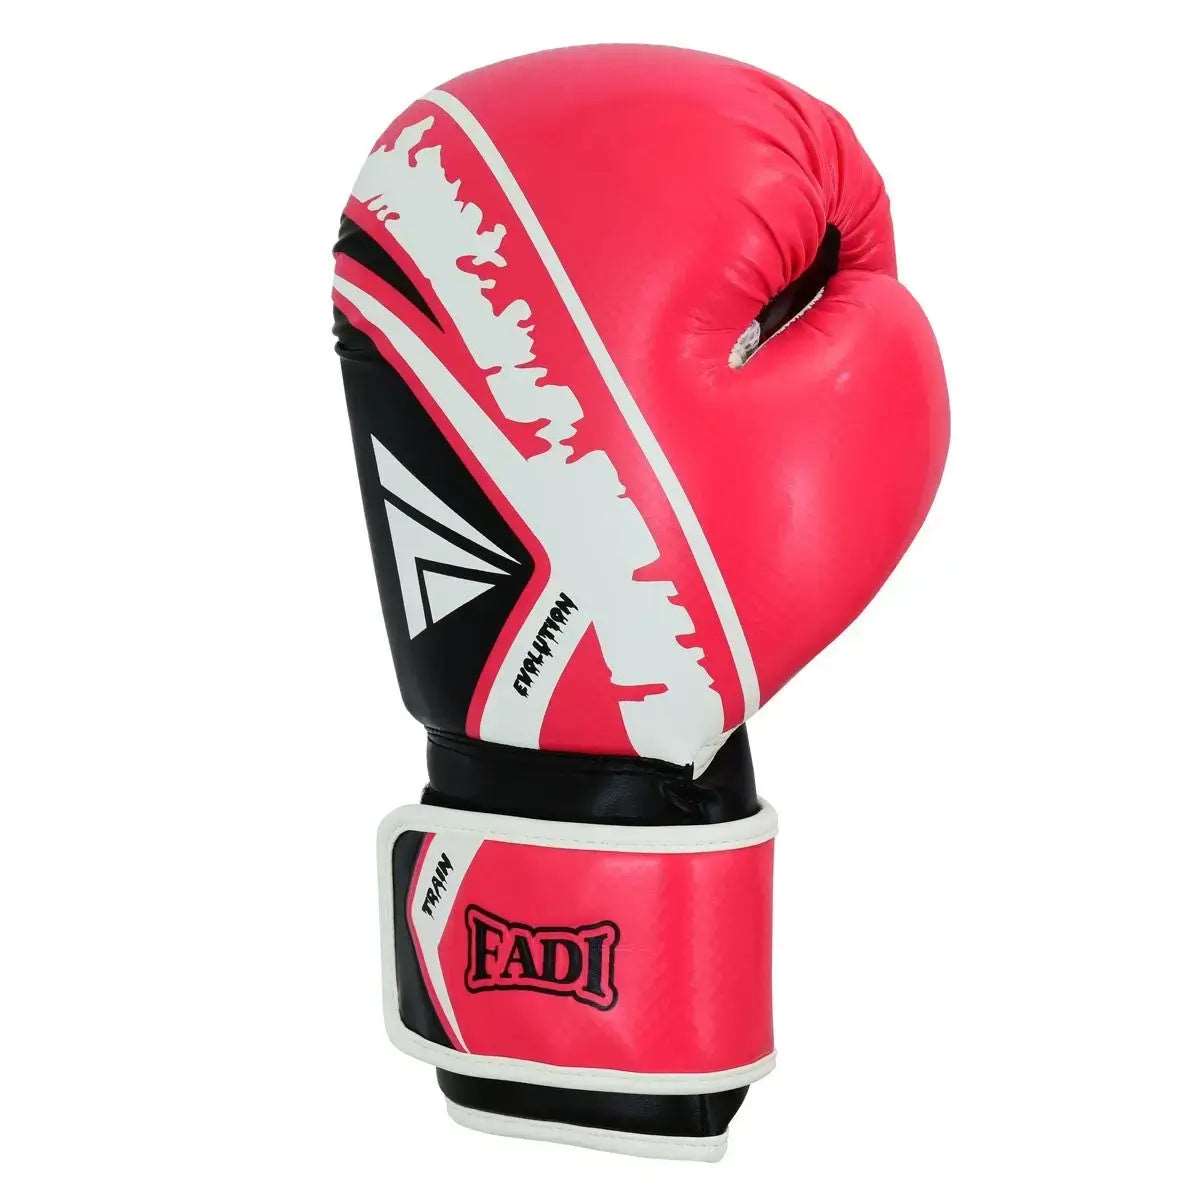 FADI | BOXING GLOVES | TRAIN EVOLUTION | MADE OF MATTE ARTIFICIAL LEATHER - www.fadisports.comBoxing Gloves & Mitts